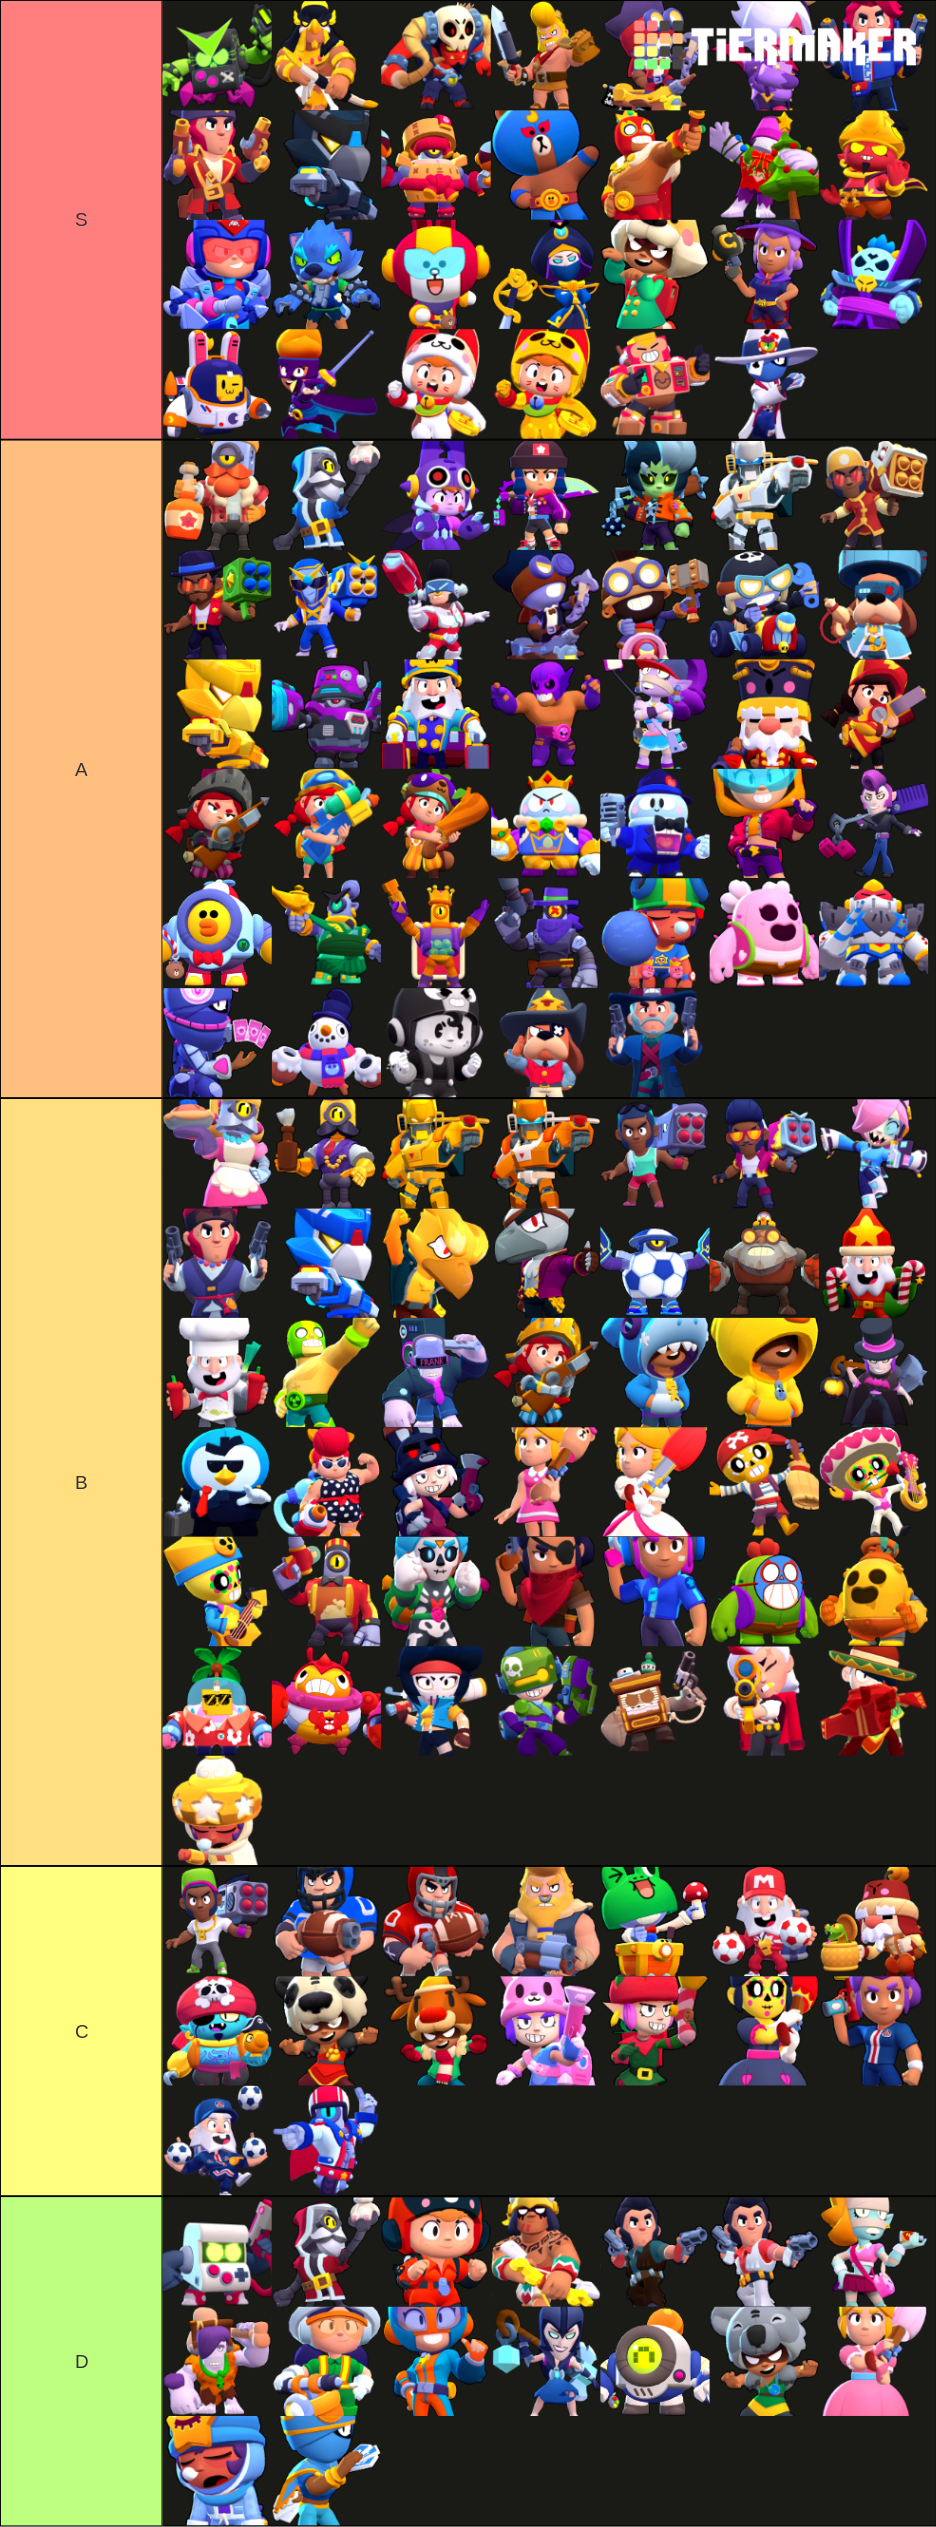 Create a Stand powers skin Tier List - TierMaker